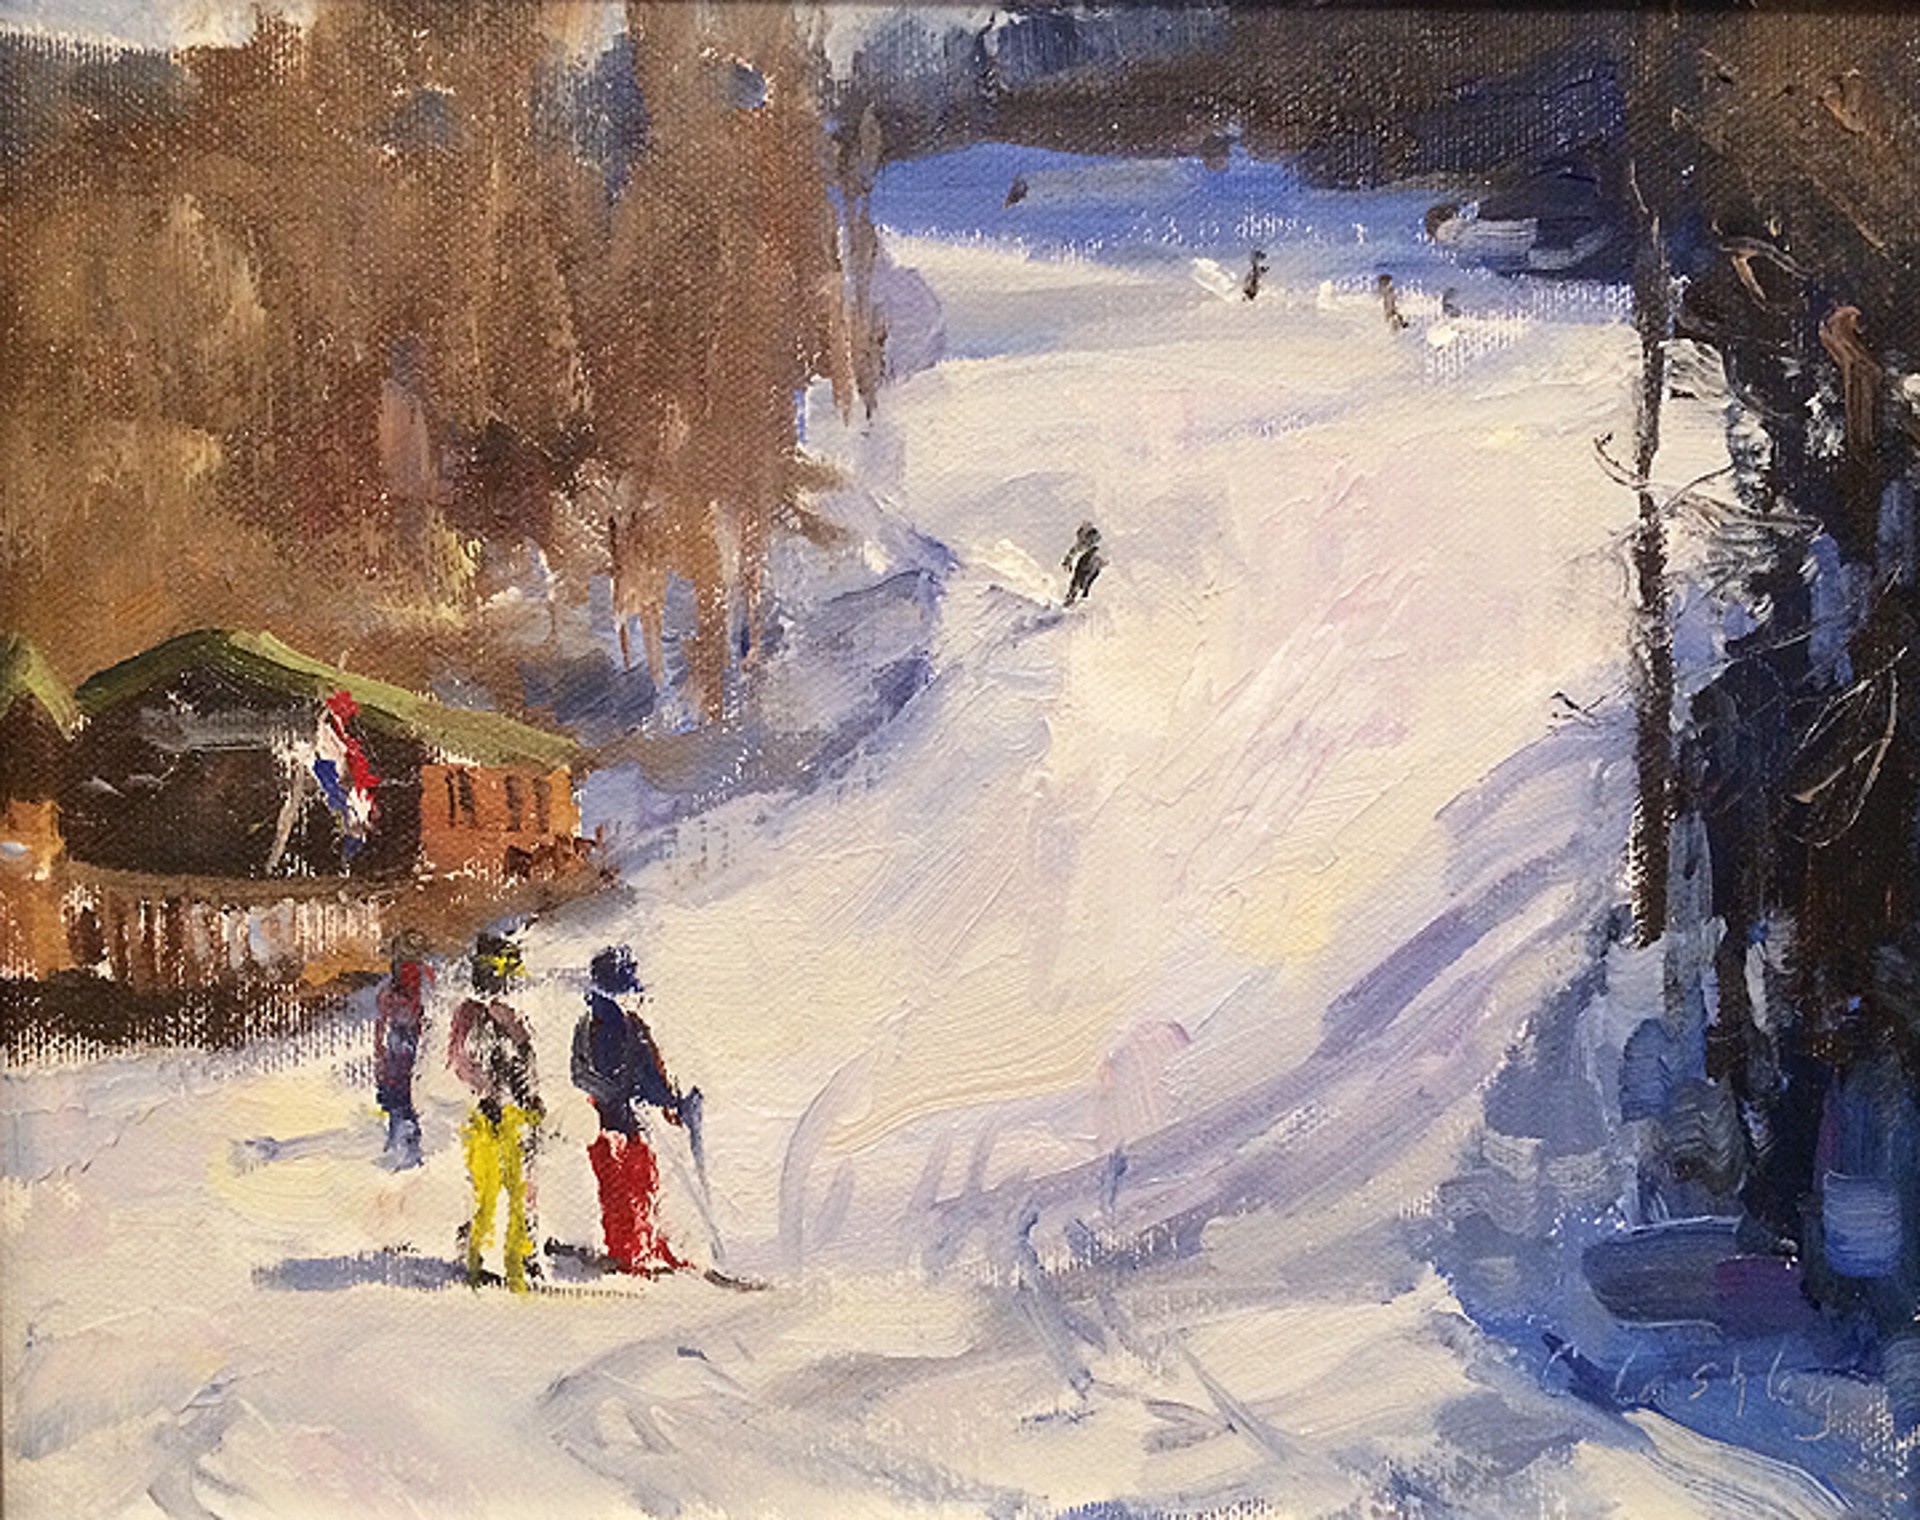 Watercolor and White Gouache SKI LIFTS 2 Painting Demo 